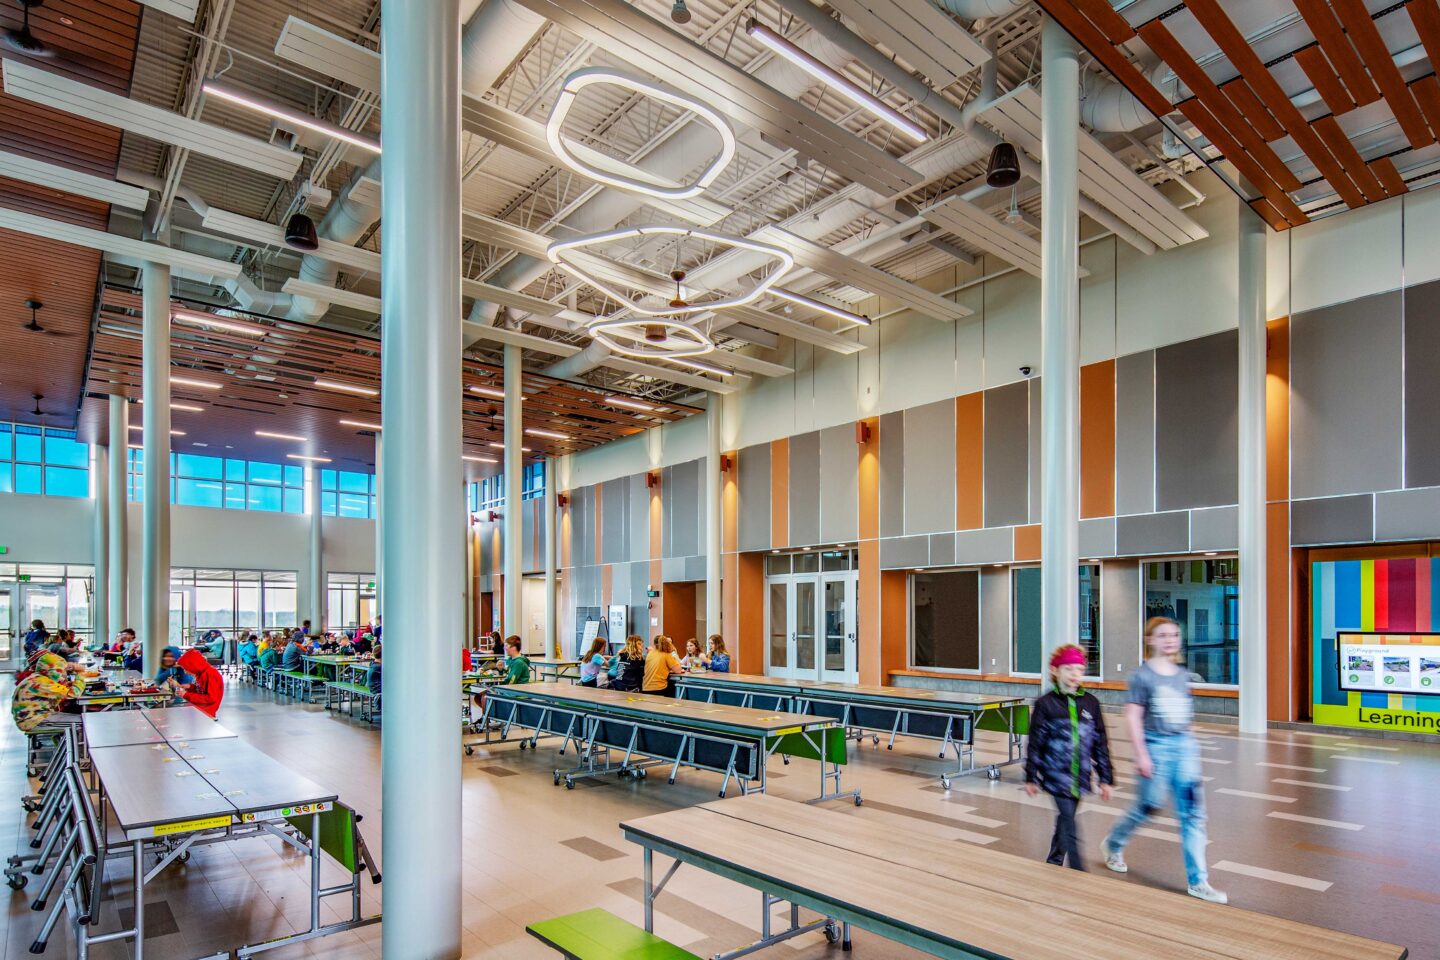 Cafeteria featuring ceiling panels with circle lights